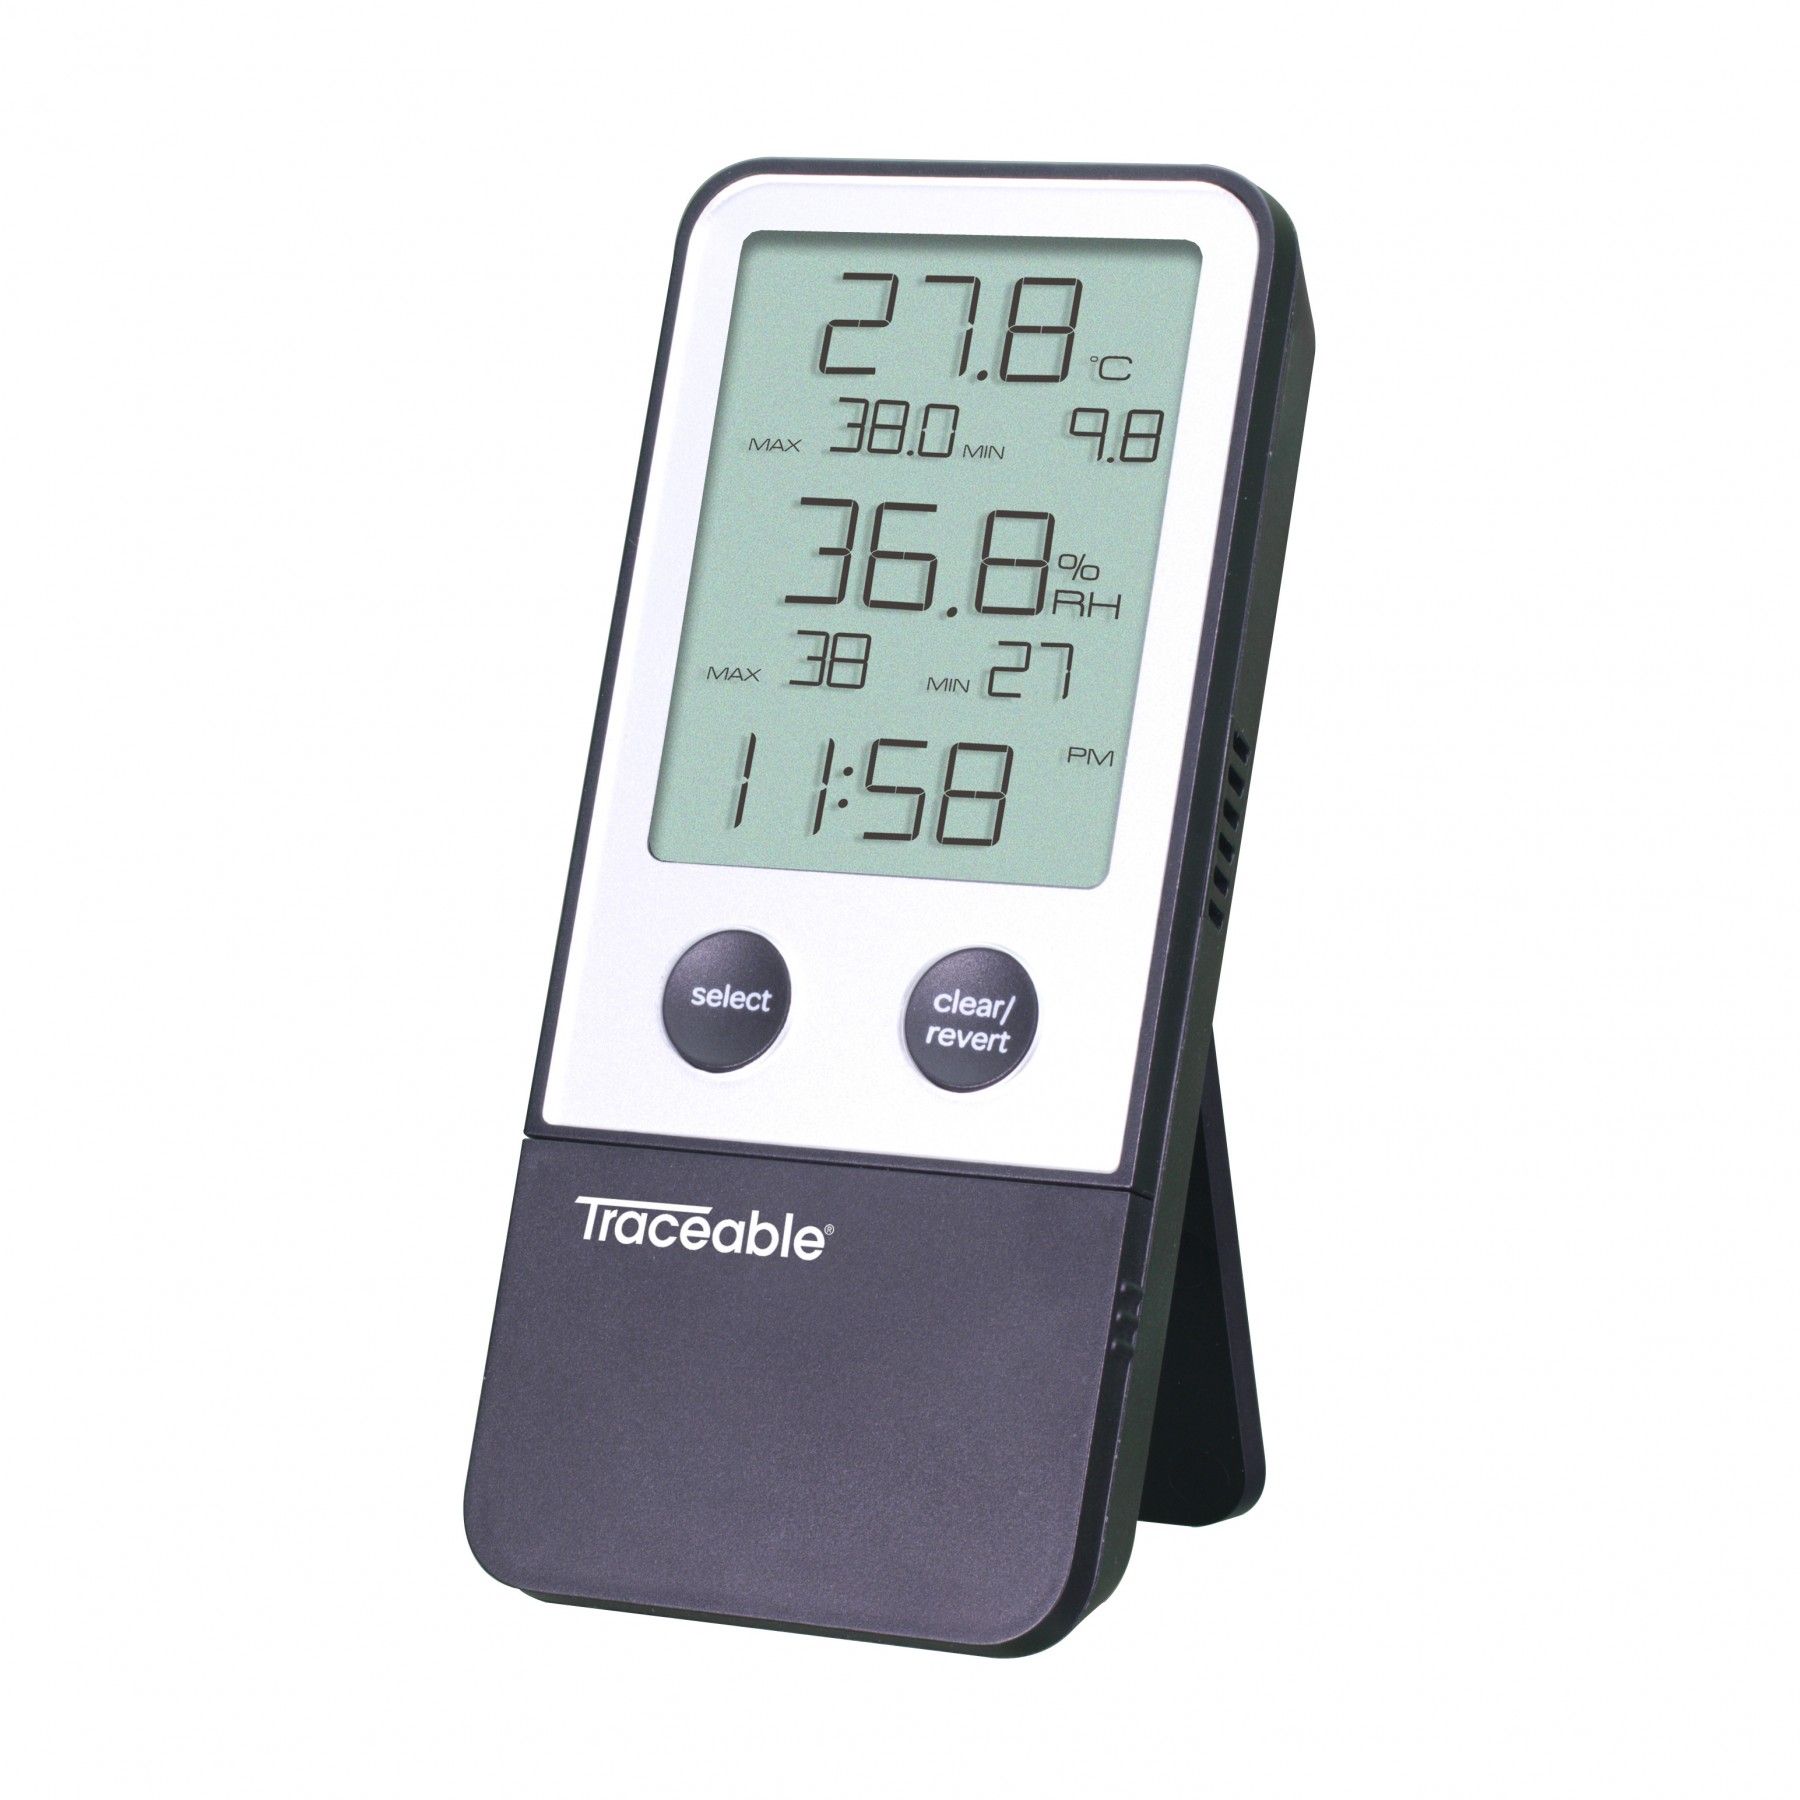 Tianlu Digital Indoor Hydrometer Grow Tent Thermometer Thermostat